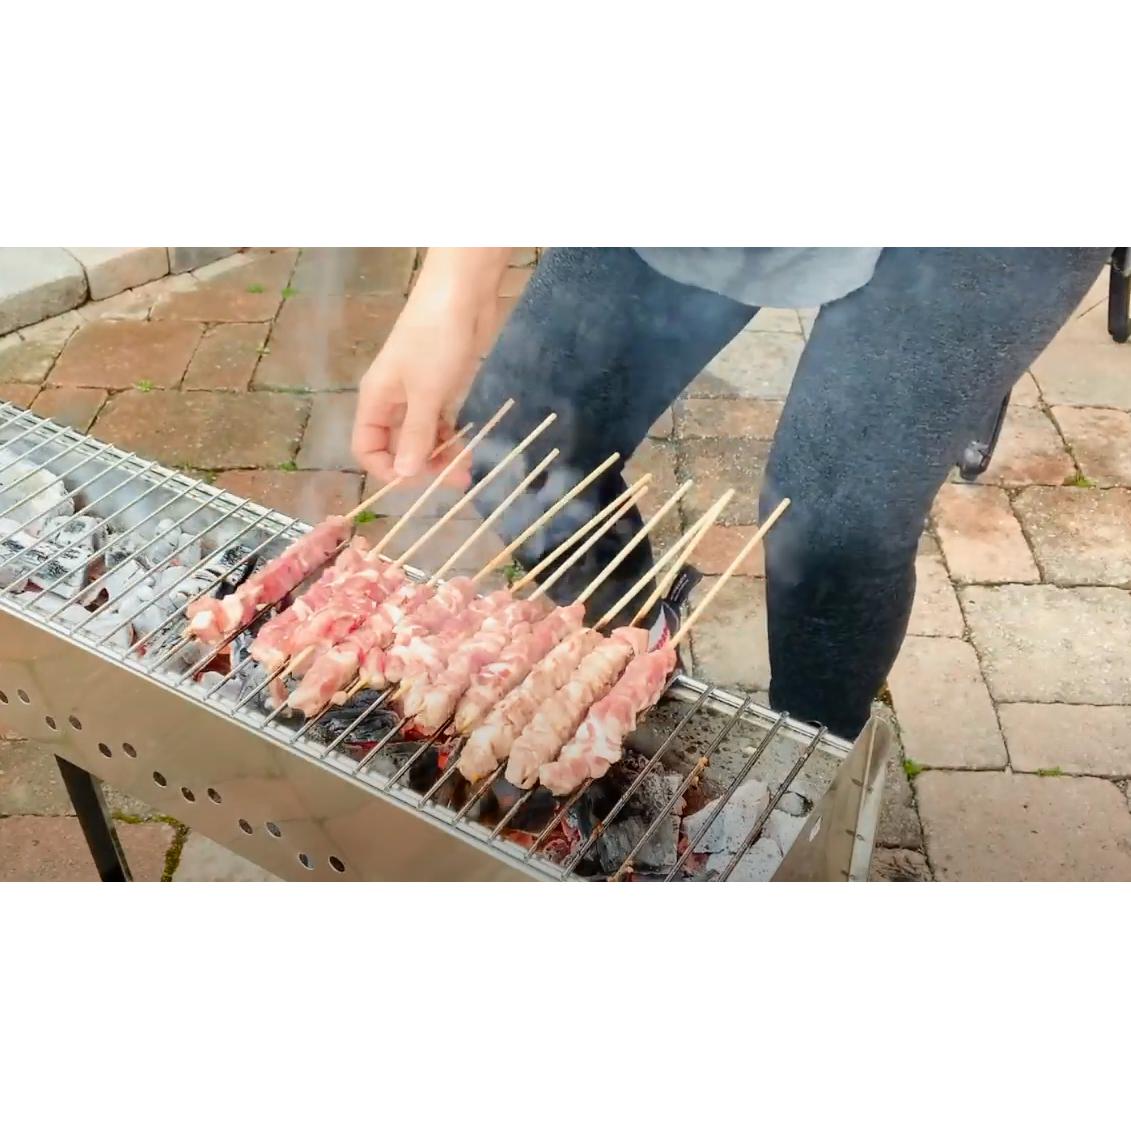 Extra Large Arrosticini BBQ & Grill (45") Made in Italy -  This Grill is for Making Authentic Arrosticini Italian Lamb Skewers from the Abruzzo Region of Italy